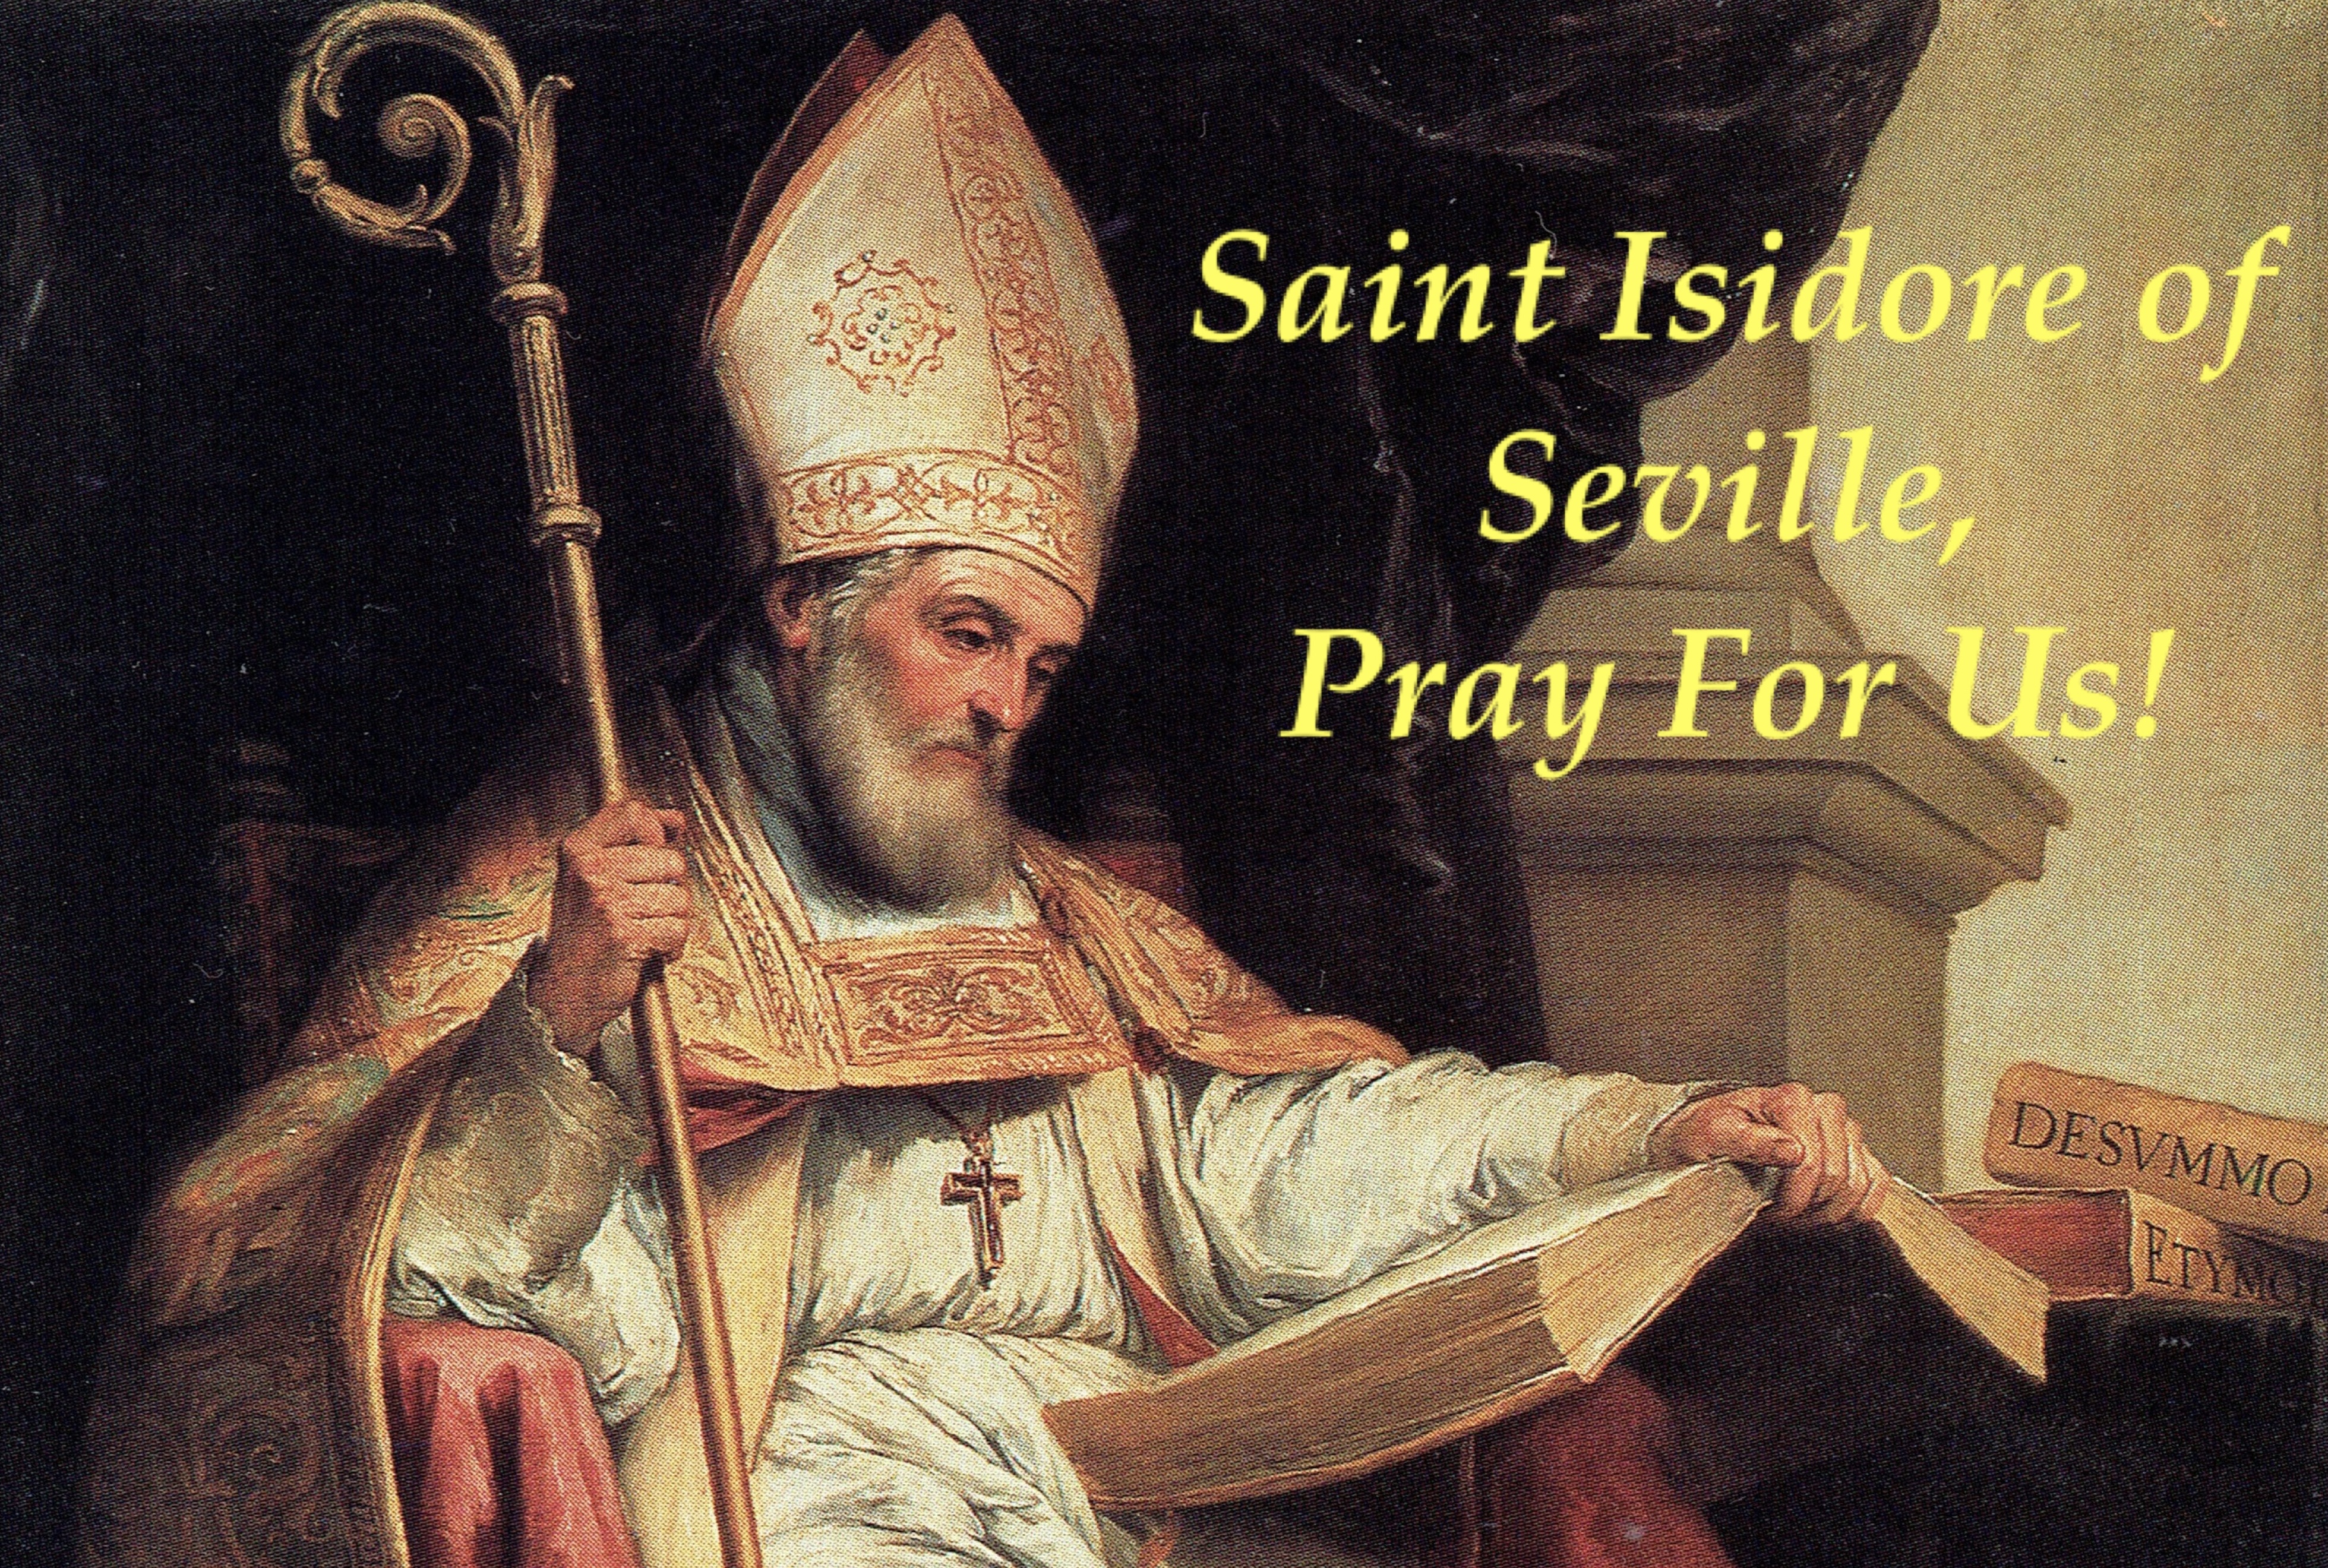 4th April - Saint Isidore of Seville